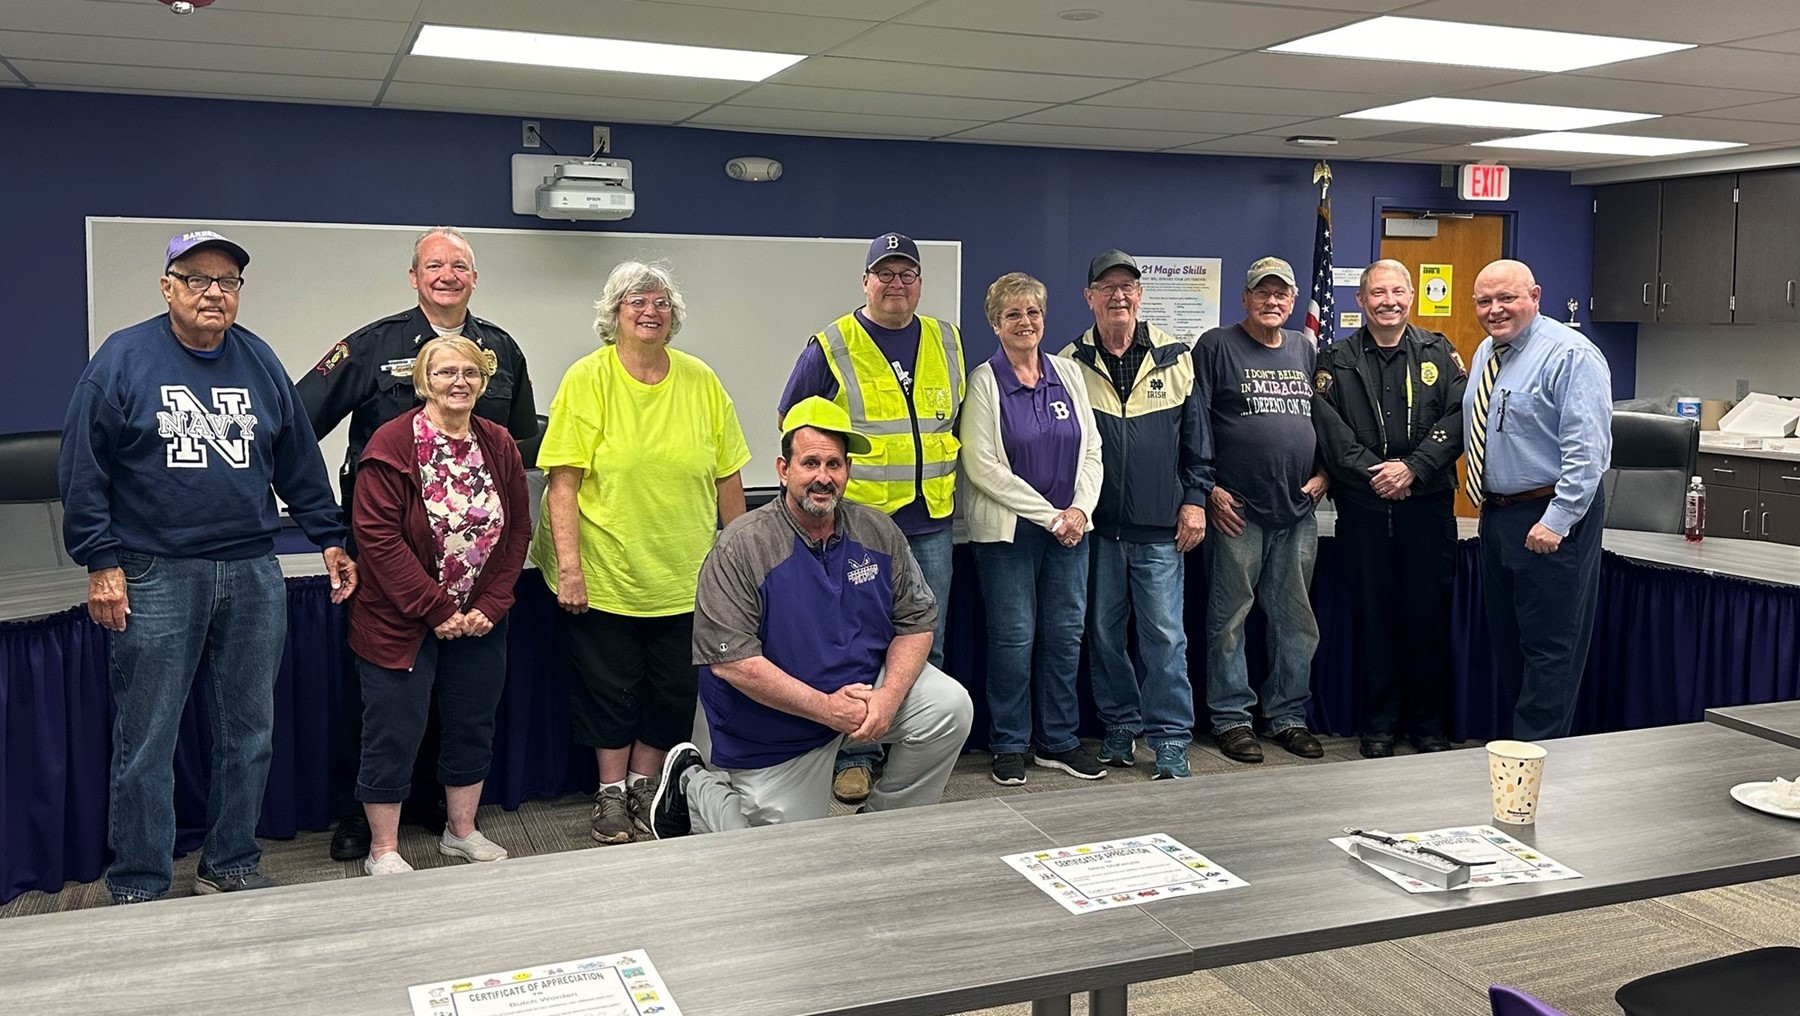 A sincere THANK YOU to the Barberton City Schools Crossing Guards!